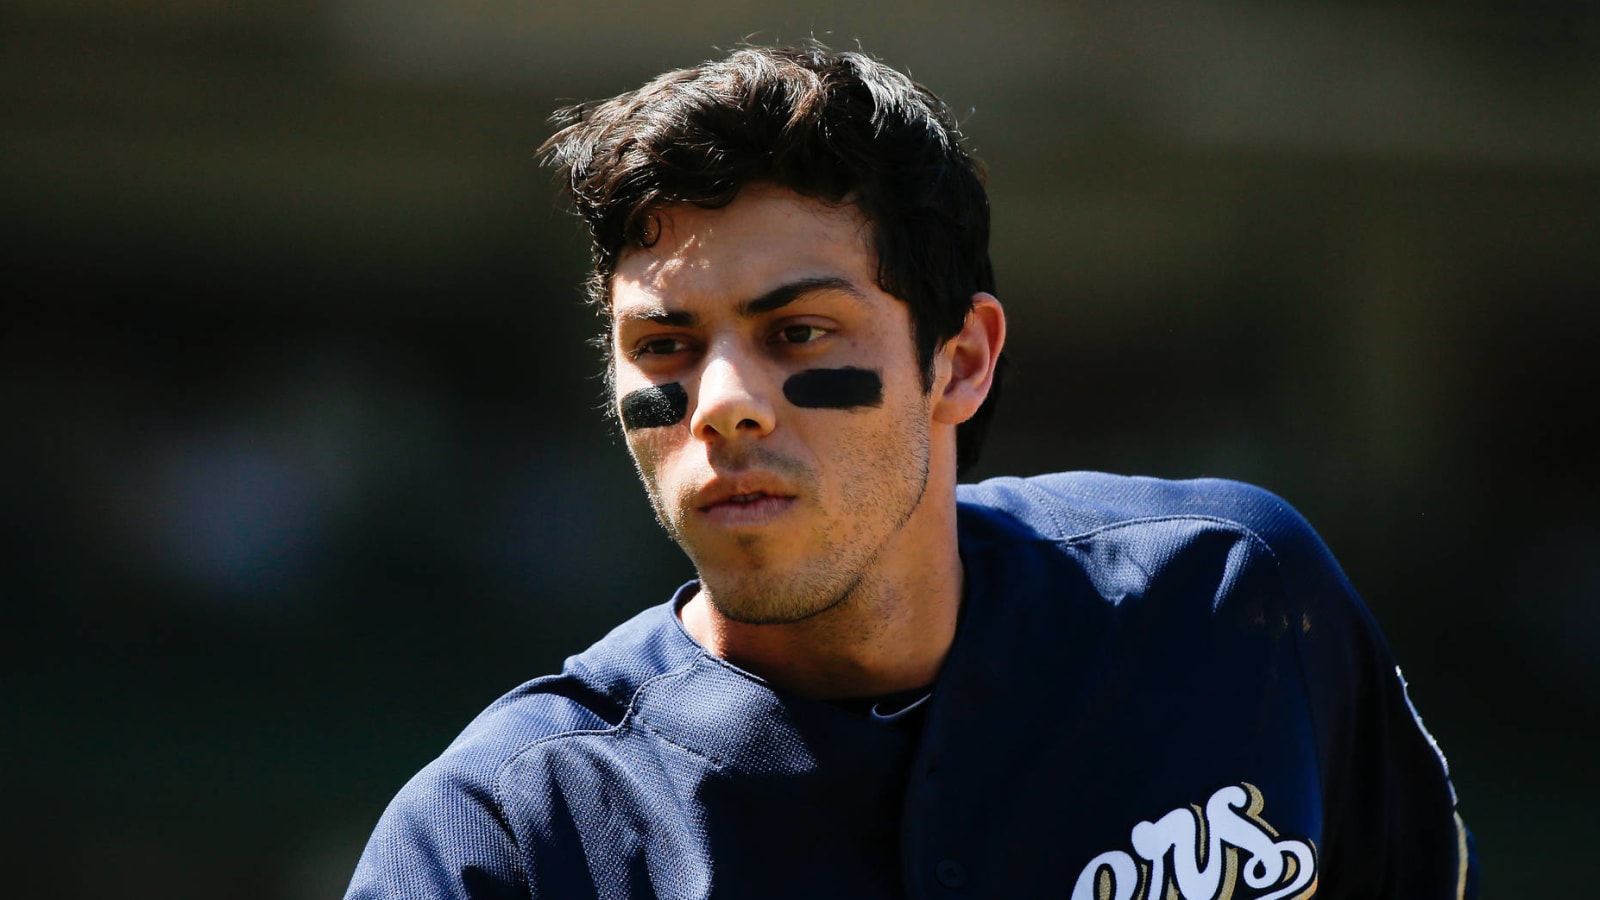 Yelich nearing 9-year, $215M extension with Brewers